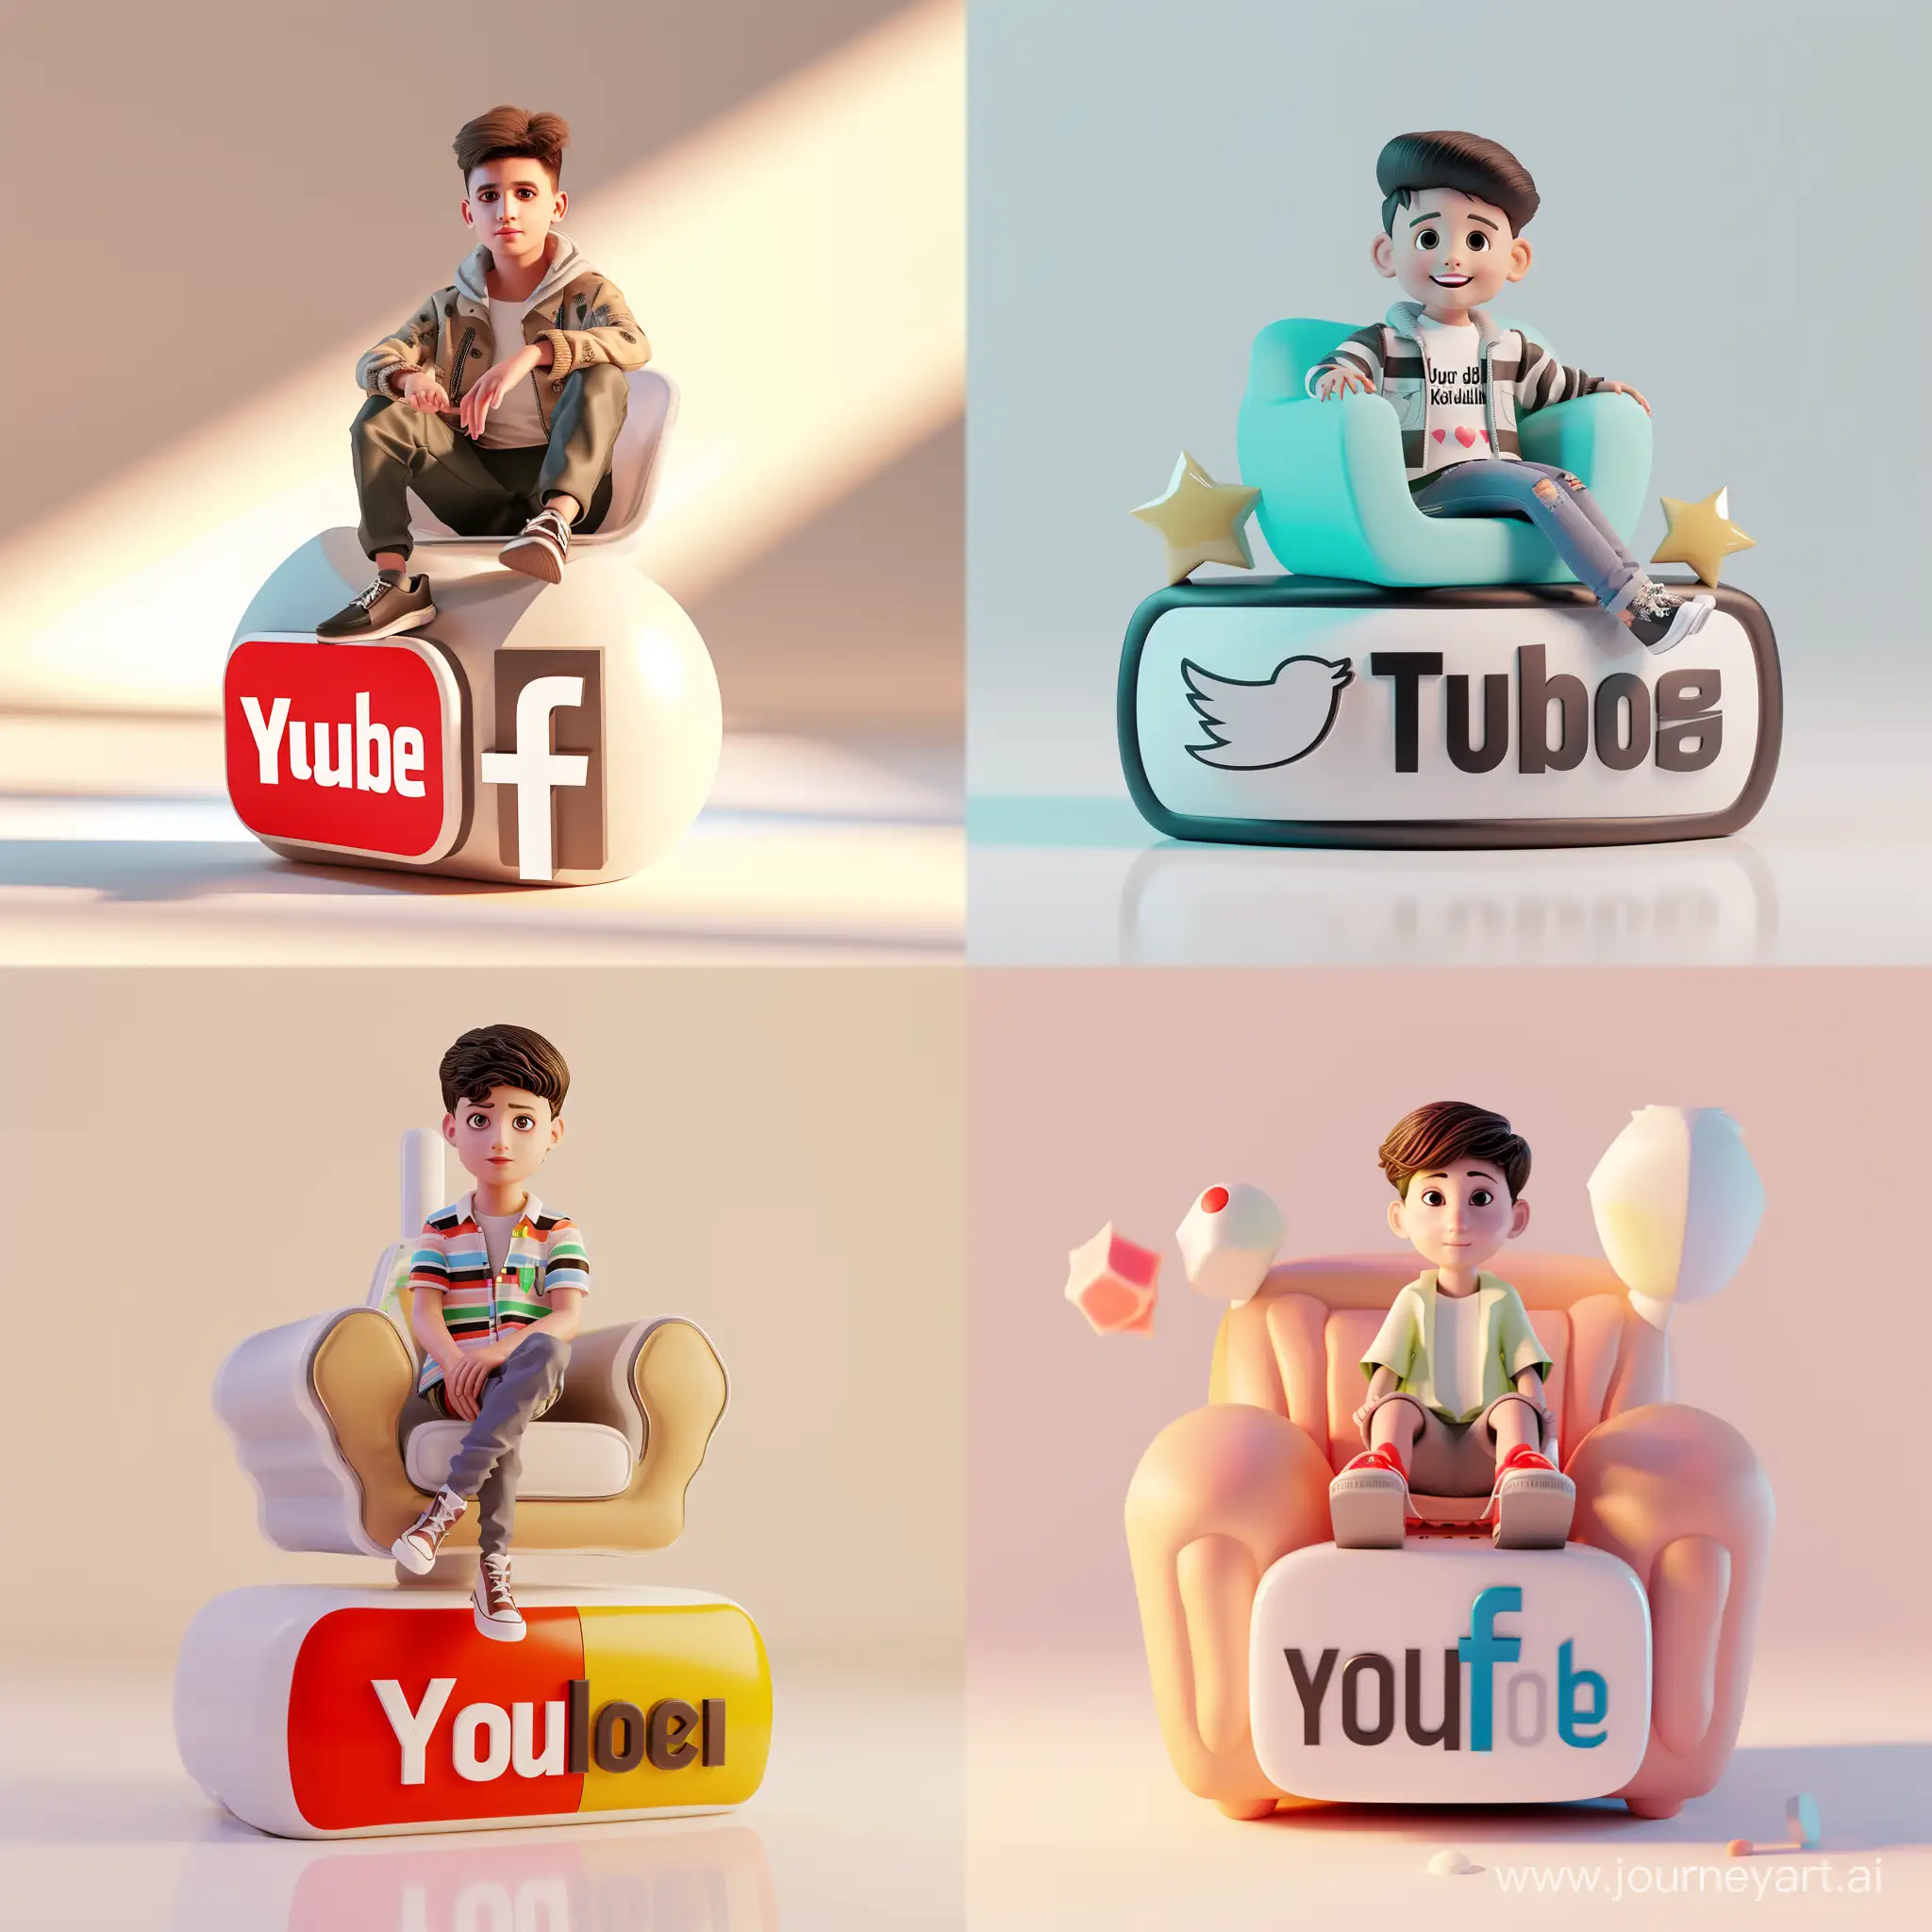 "Create a 3D illustration of an animated character of a handsome boy sitting casually on top of a social media logo "YouTube". The character must wear modern  clothes. The background of the character is mockup of his YouTube profile page with a profile name "Omar AbdAllah" and a profile picture same as character."
البرومبت:  realistic  photo of a cute boy sitting on a logo chair of a social media logo "facebook". wearing Top model clothes. The background is mockup of his Facebook profile page with a profile name "Abdallah khidr" and a profile picture . soft light reflection
